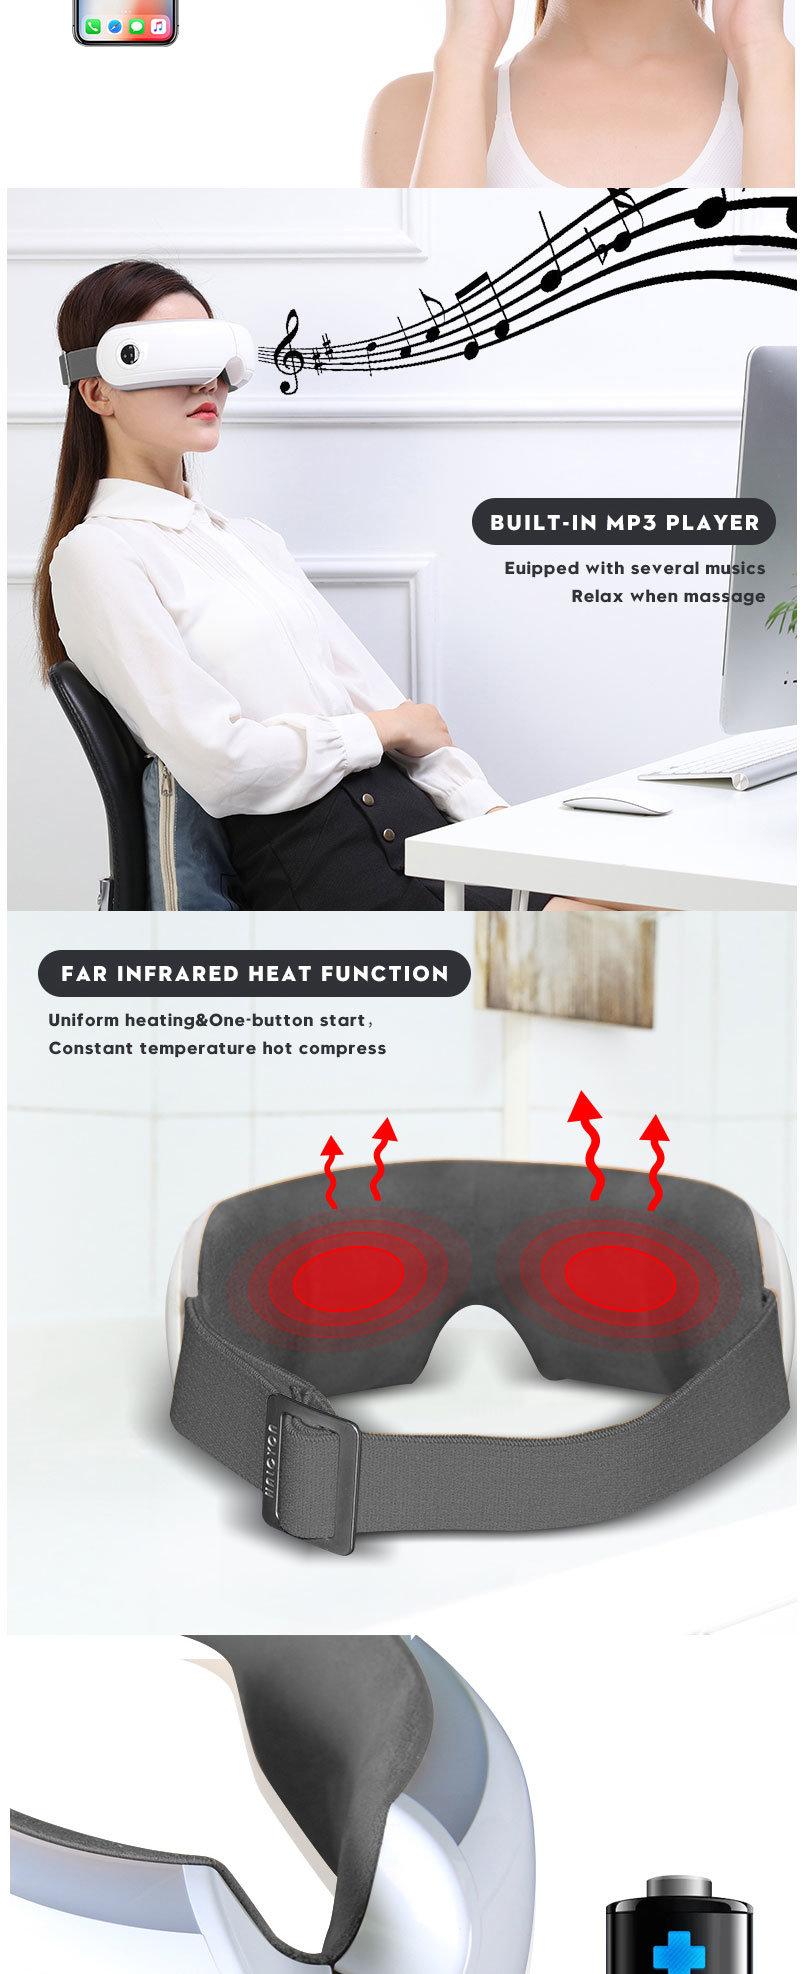 Hezheng Rechargeable Foldable Wireless Bluetooth Intelligent Electric Portable Eye Massager